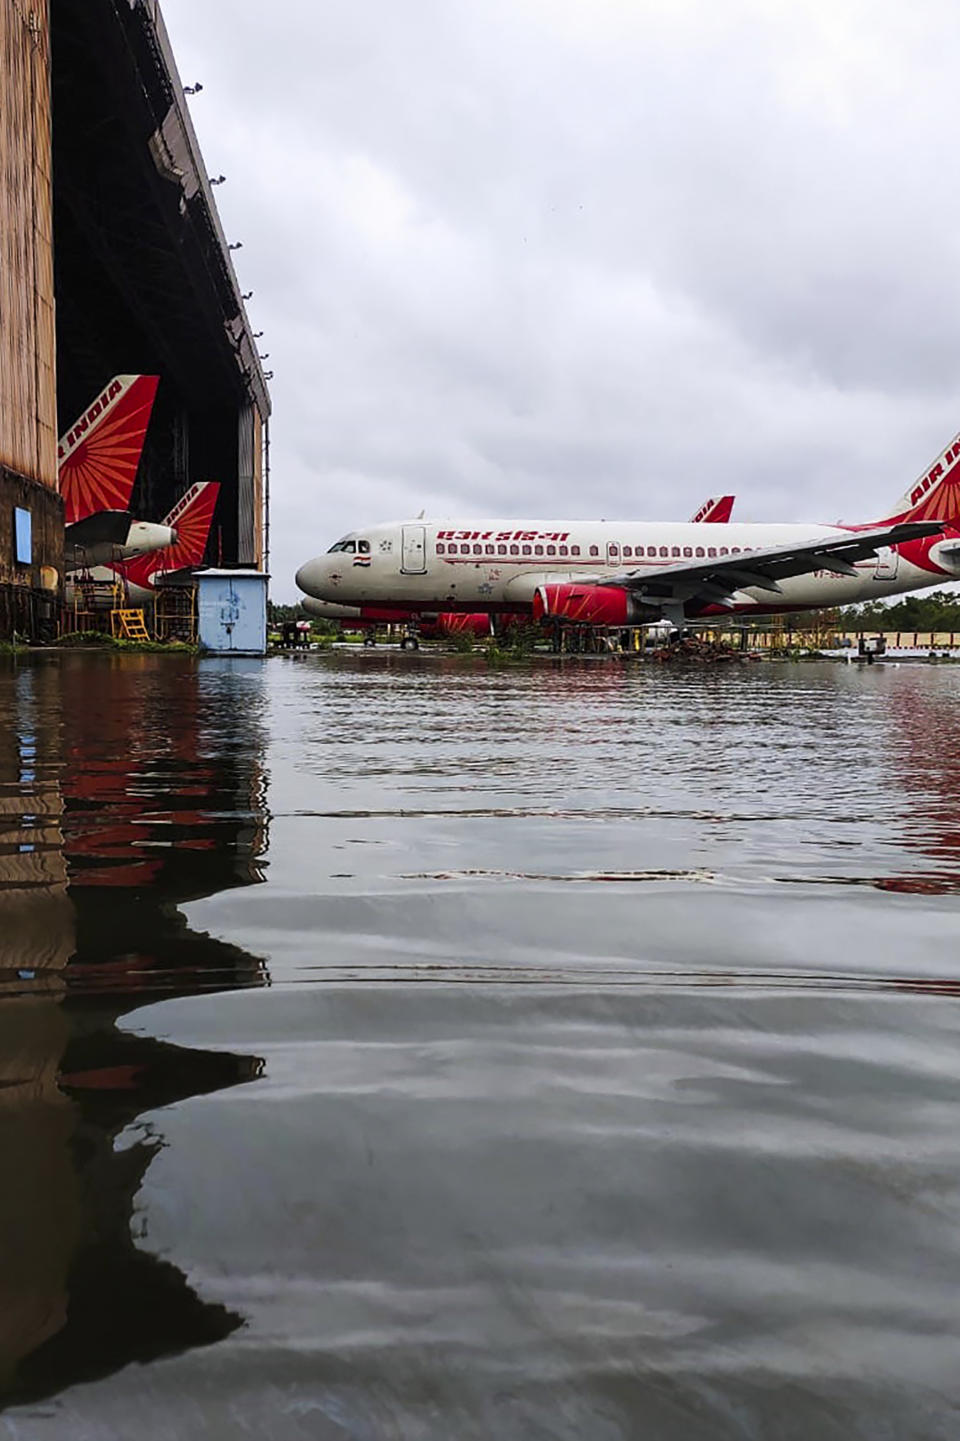 Air India aircrafts are parked at the flooded Netaji Subhas Chandra Bose International Airport after the landfall of cyclone Amphan in Kolkata on May 21, 2020. - The most powerful cyclone to hit Bangladesh and eastern India in more than 20 years tore down homes, carried cars down flooded streets and claimed the lives of more than a dozen people. (Photo by - / AFP) (Photo by -/AFP via Getty Images)